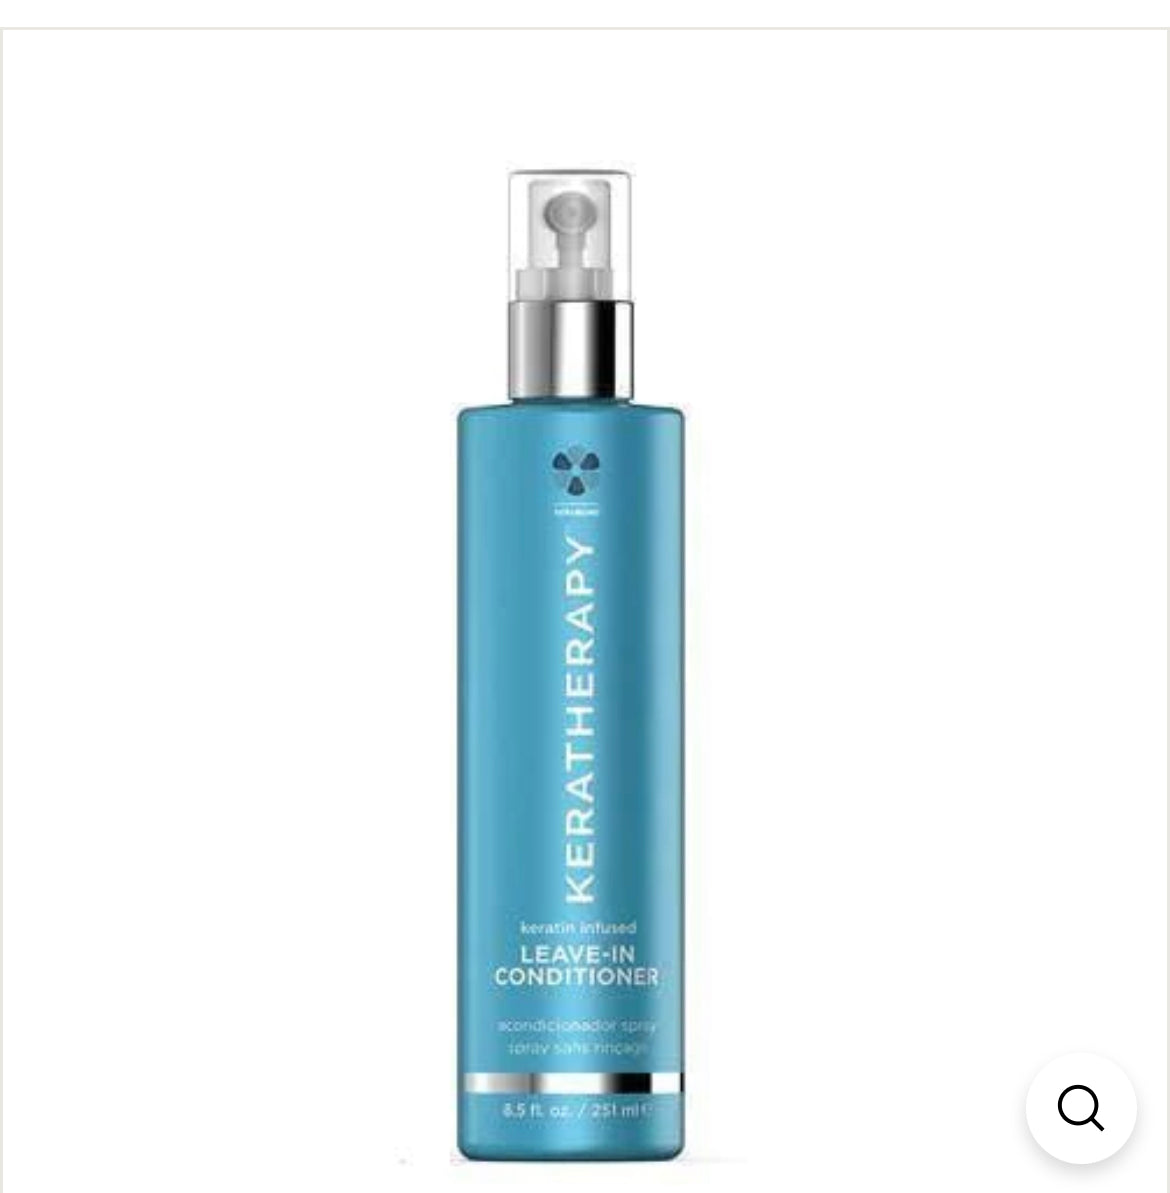 KeraTherapy Leave-In Conditioner